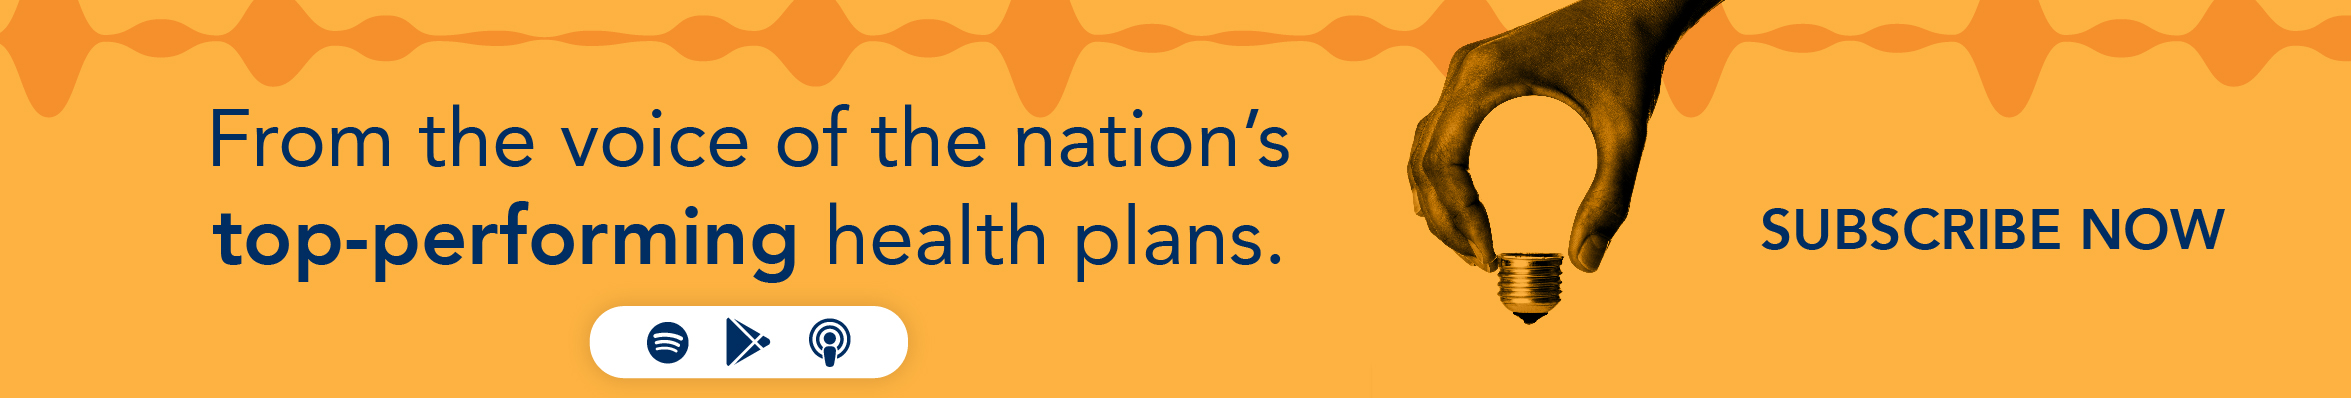 Banner with text: From the Voice of the Nation's Top Performing Health Plans - Subscribe now